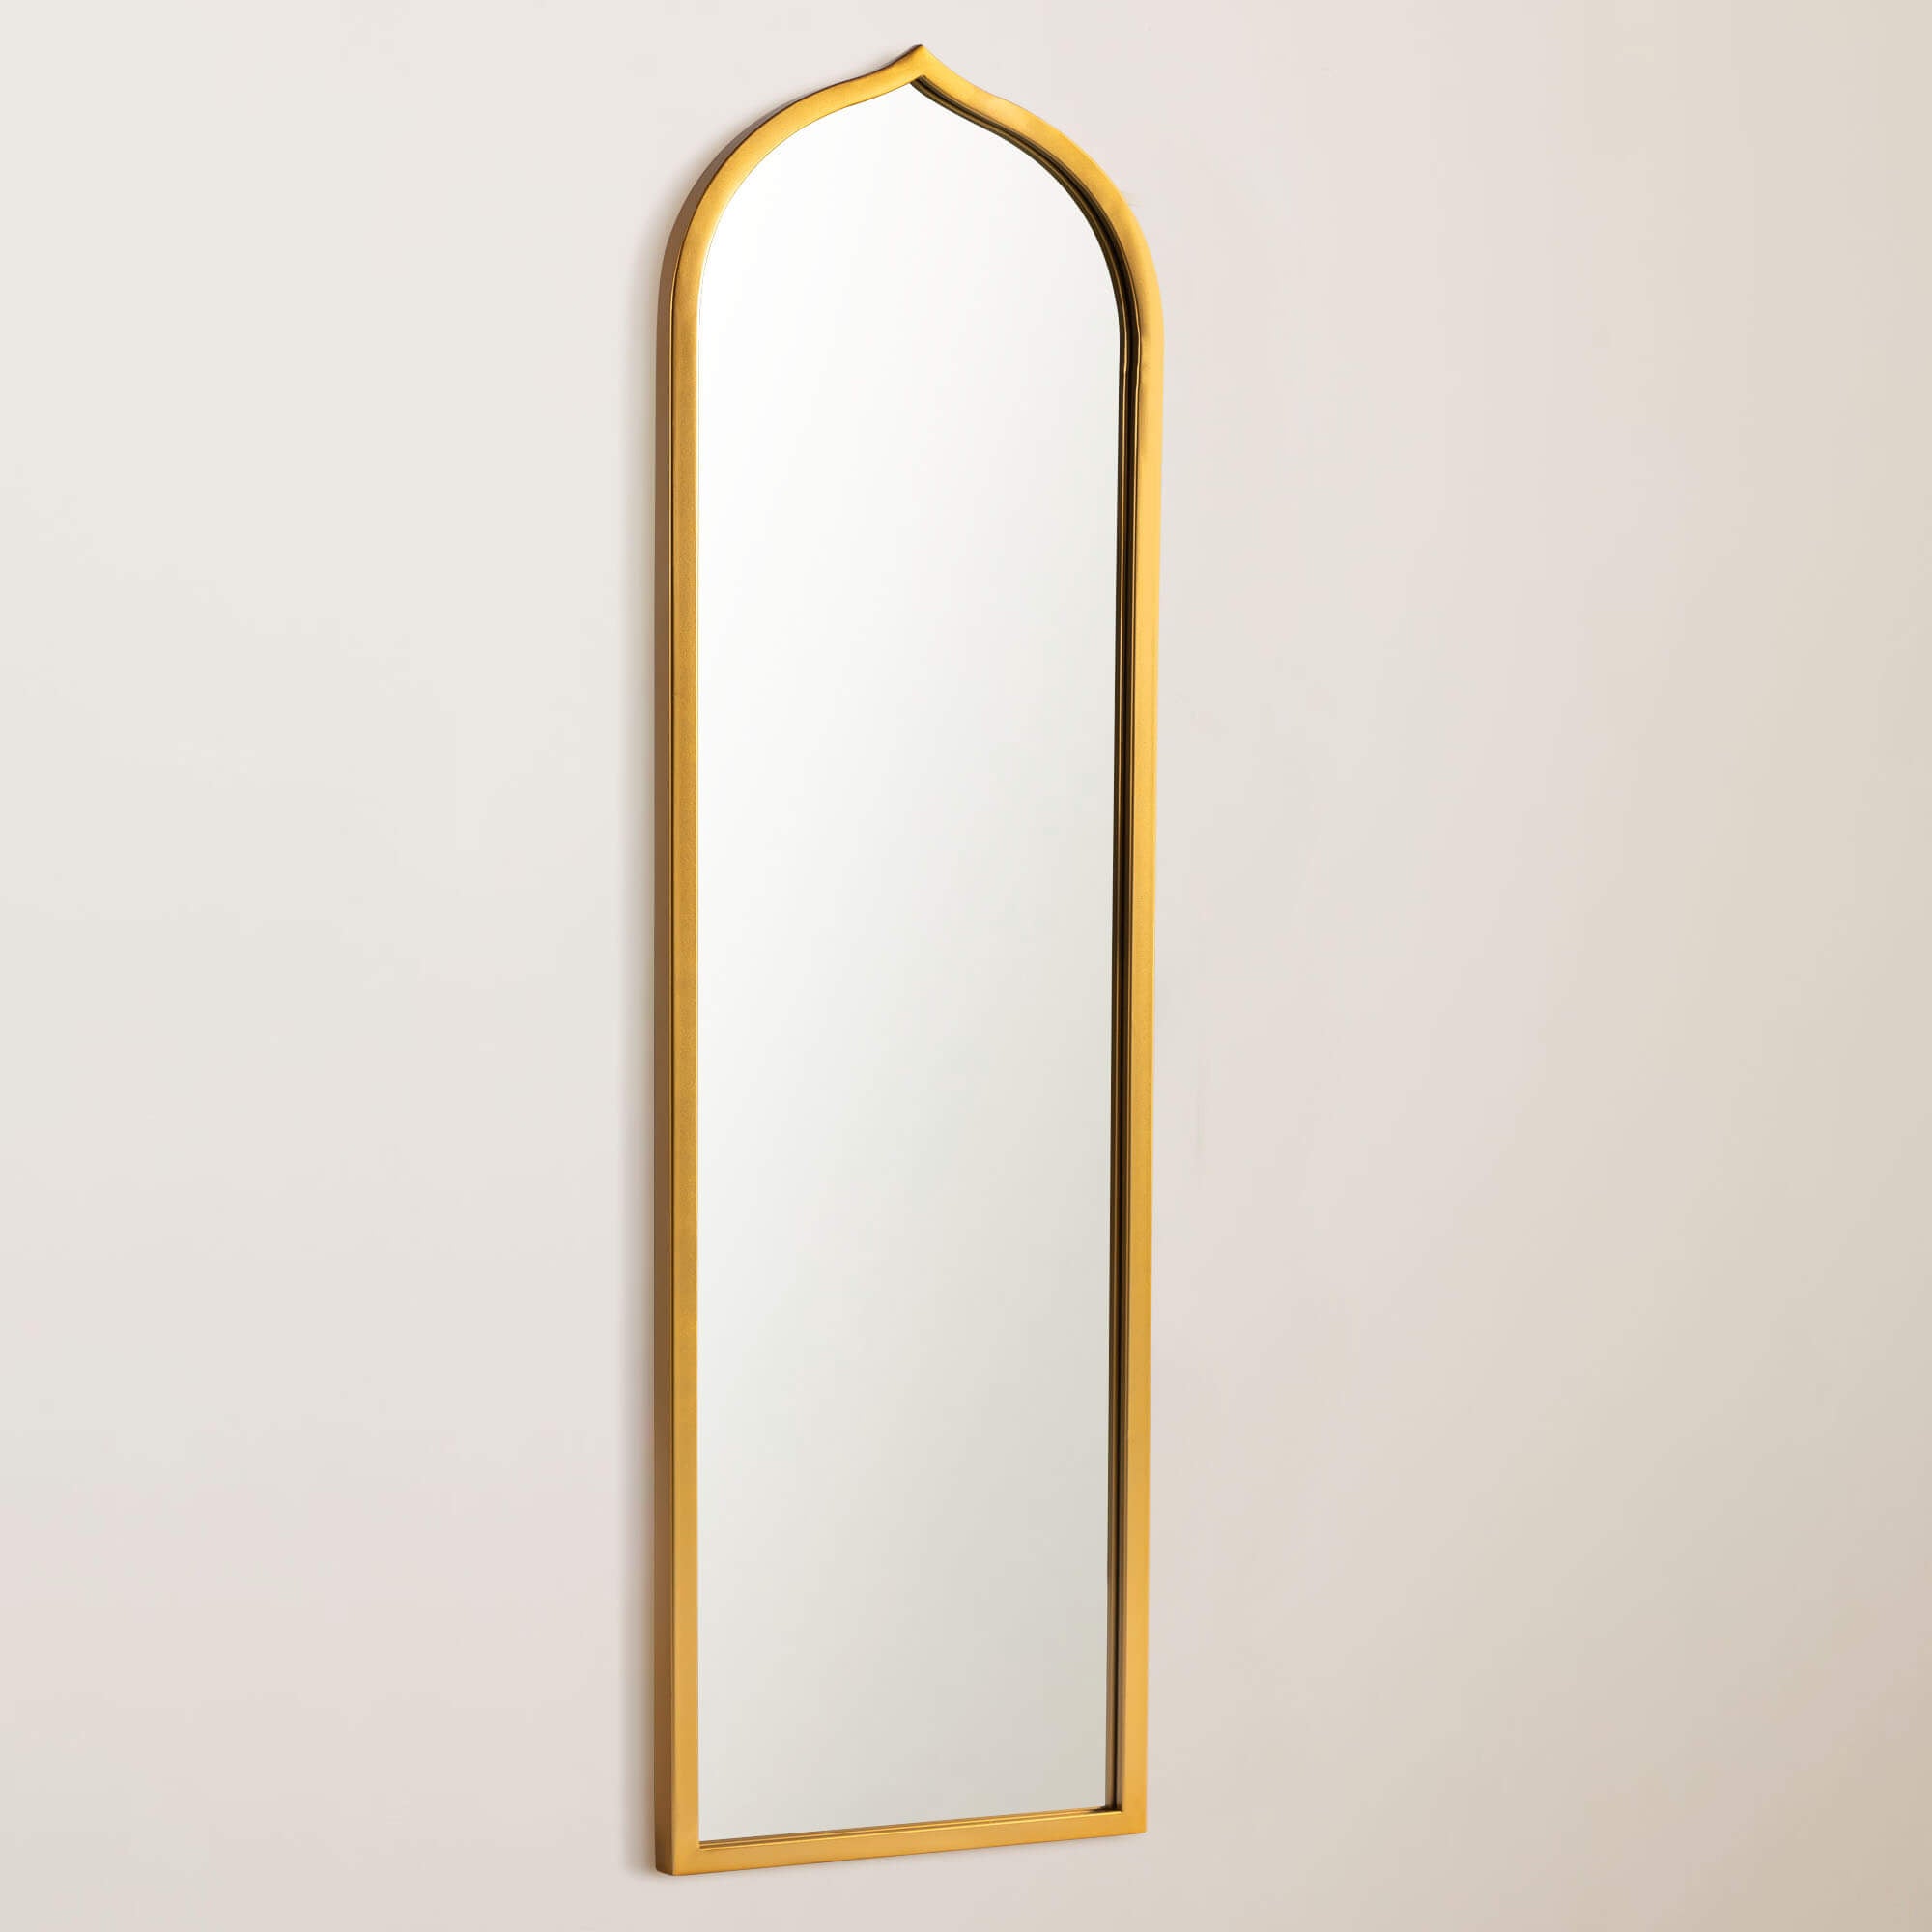 Hilary- Iron Elongated Gold & Black Arched Wall Decor Wall Mirror